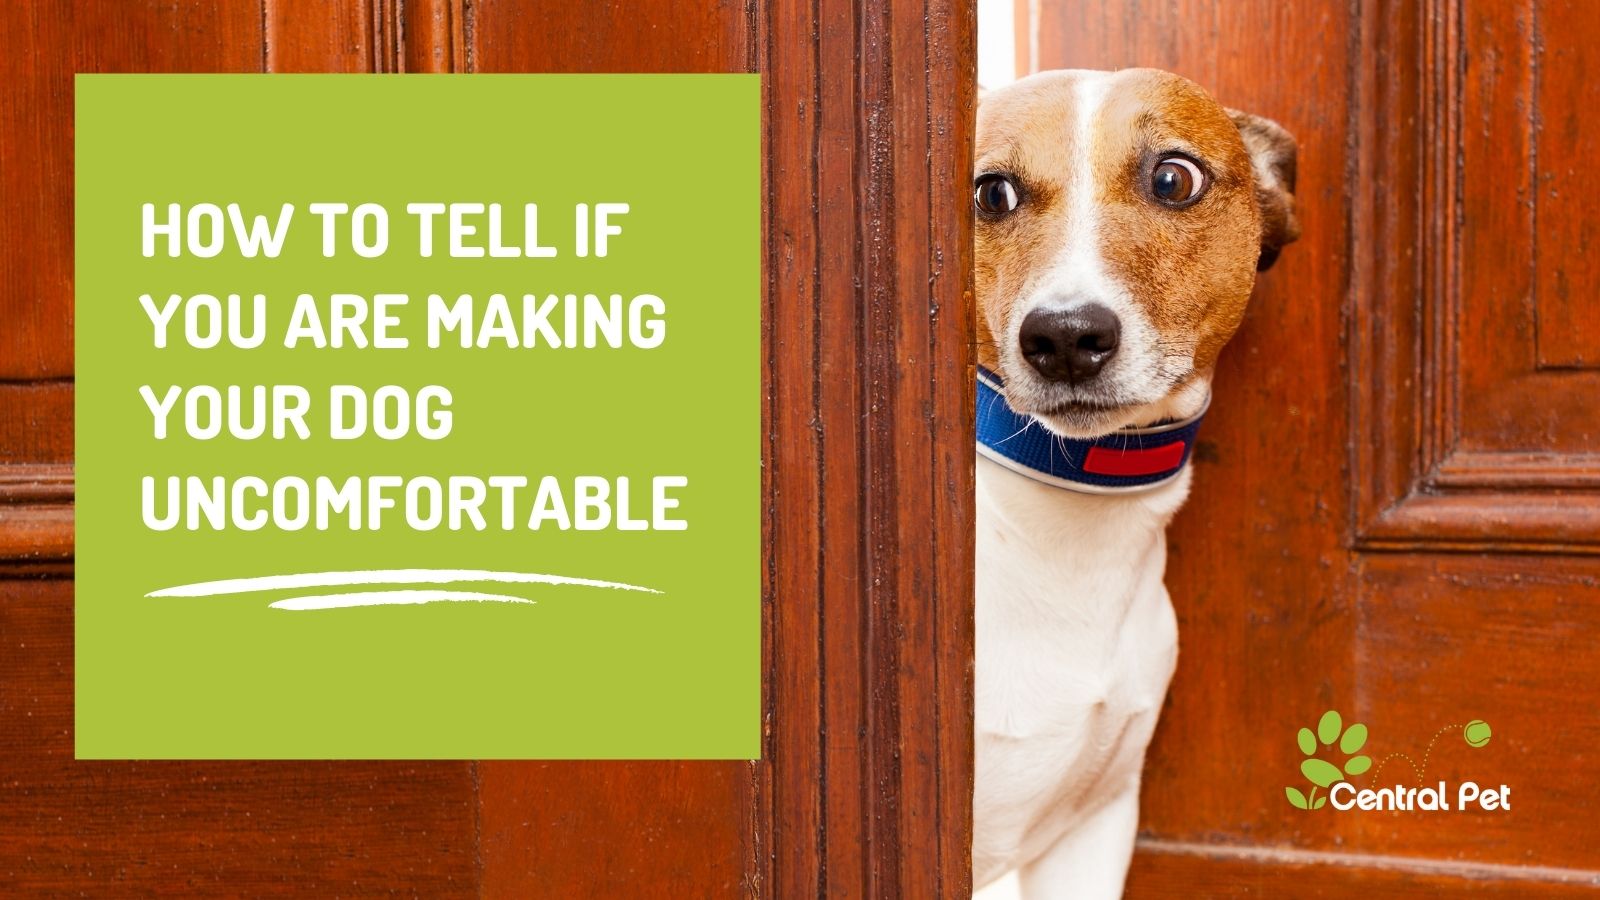 Are You Making Your Dog Uncomfortable? How To Tell